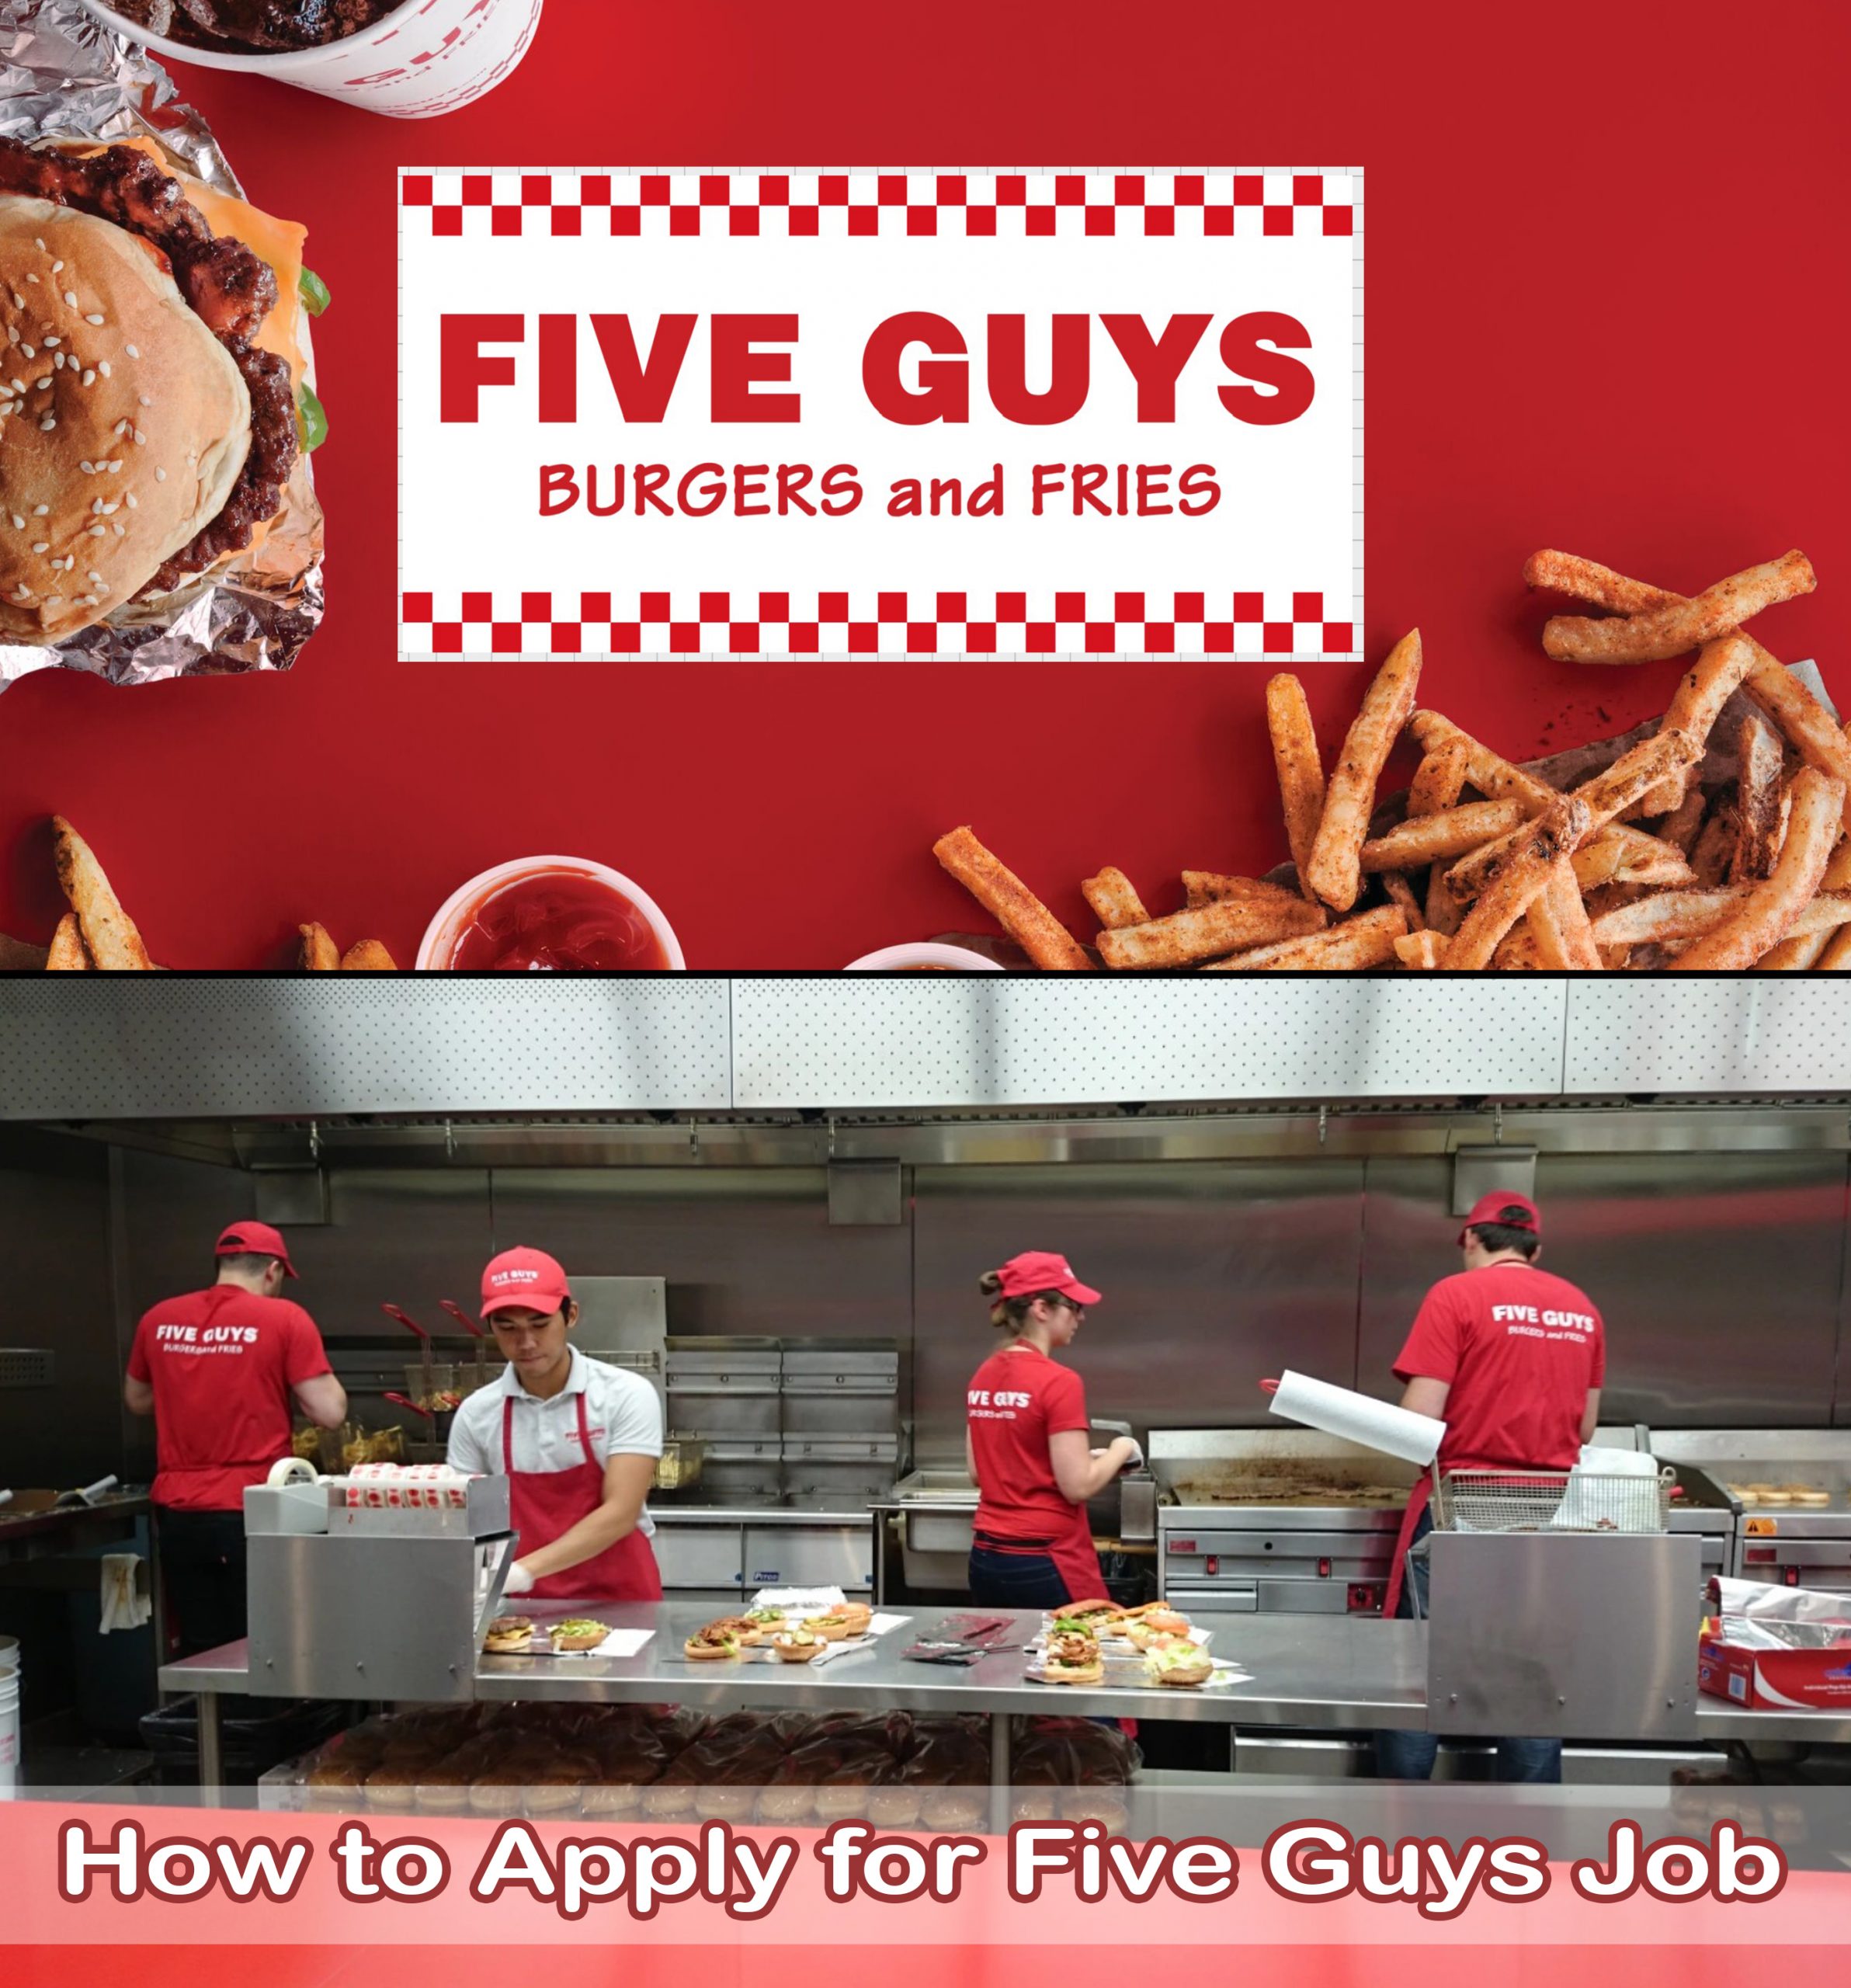 How to Apply for Five Guys Job